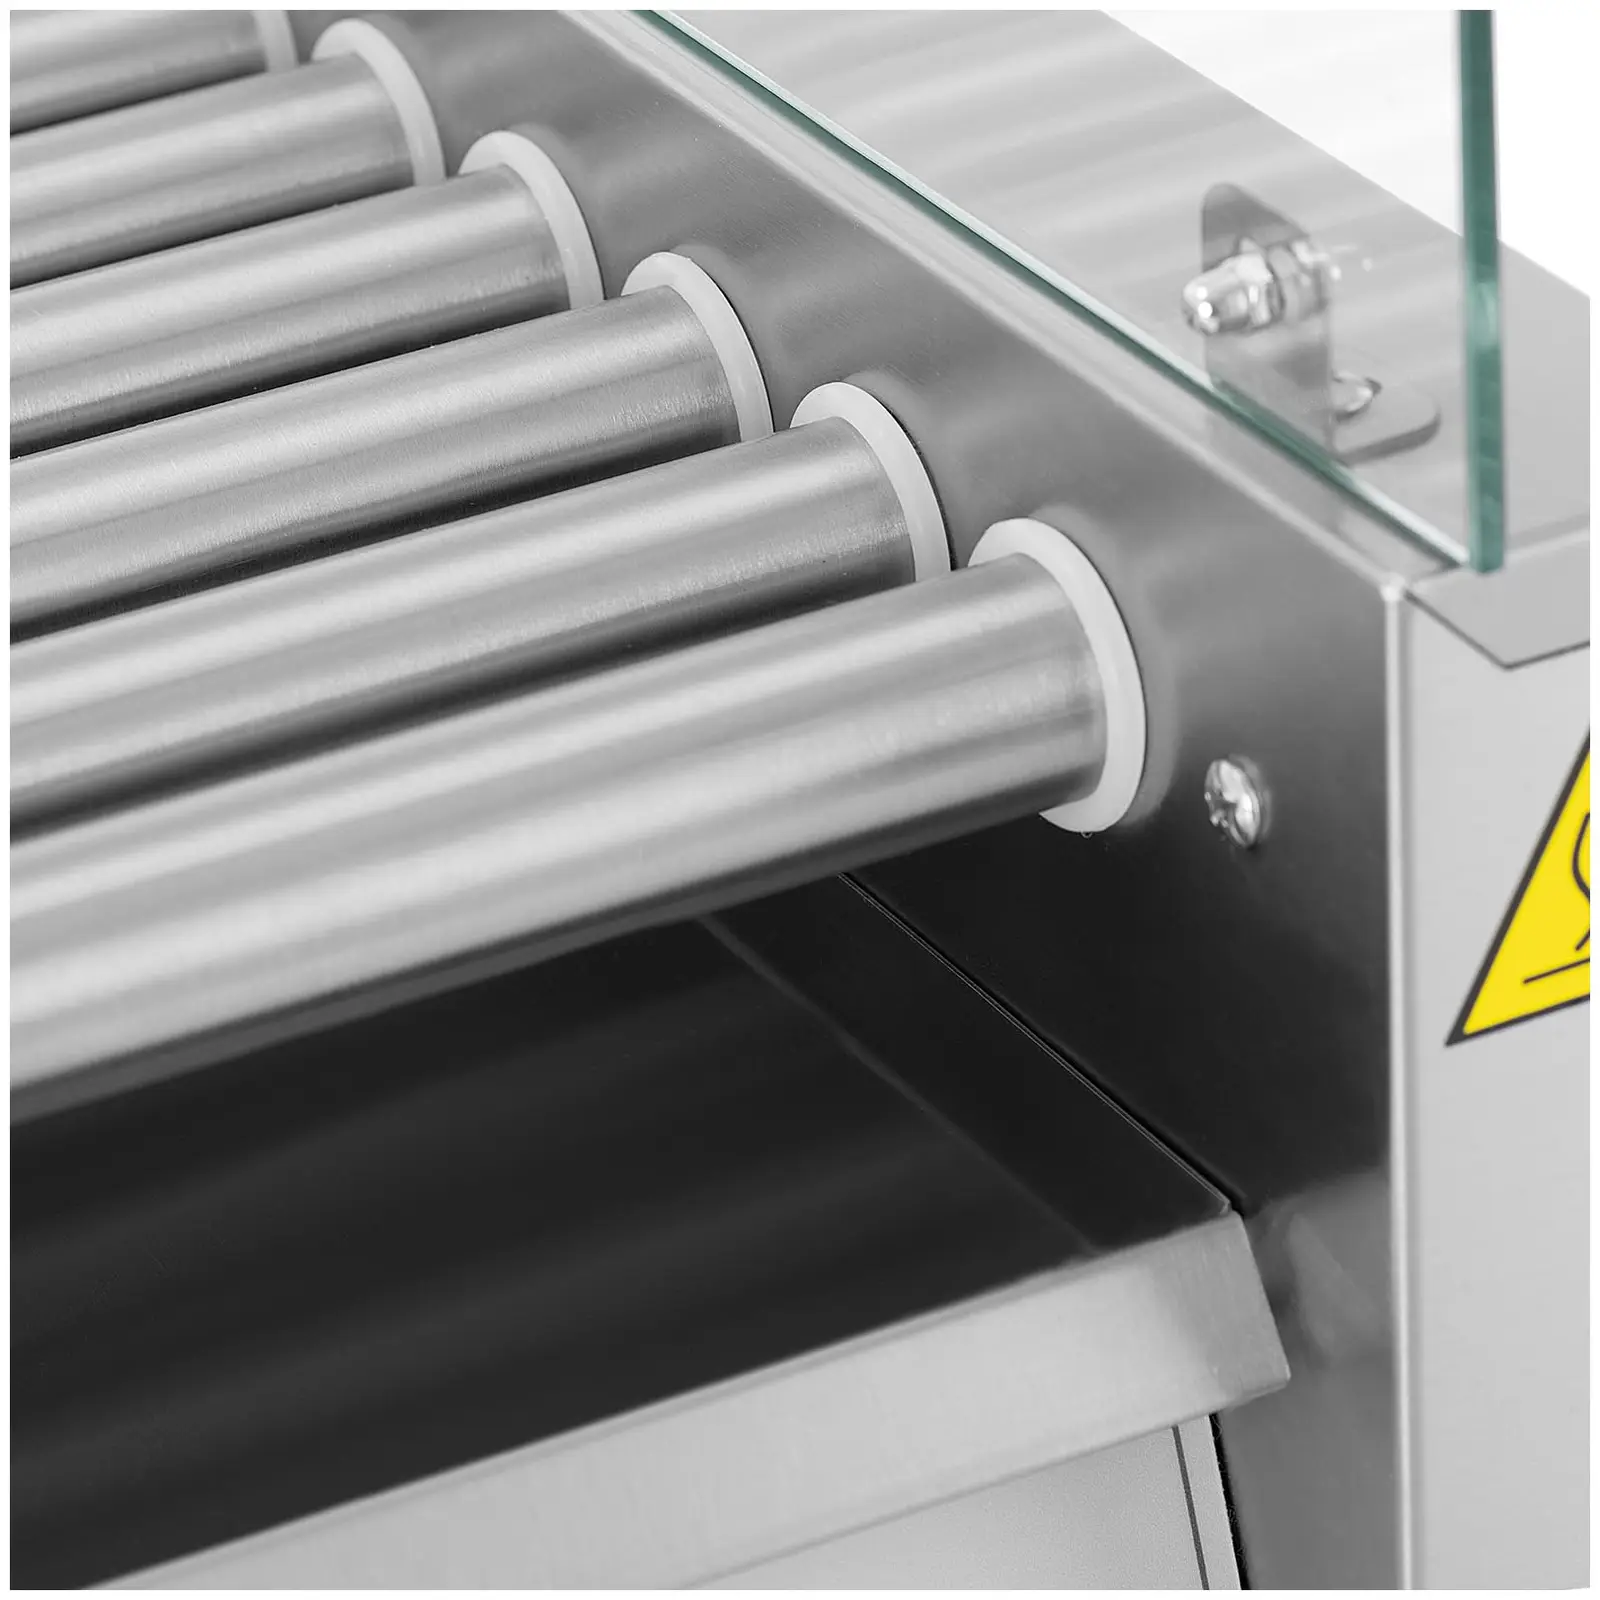 Hot Dog Grill - 9 rollers - Royal Catering - stainless steel cover